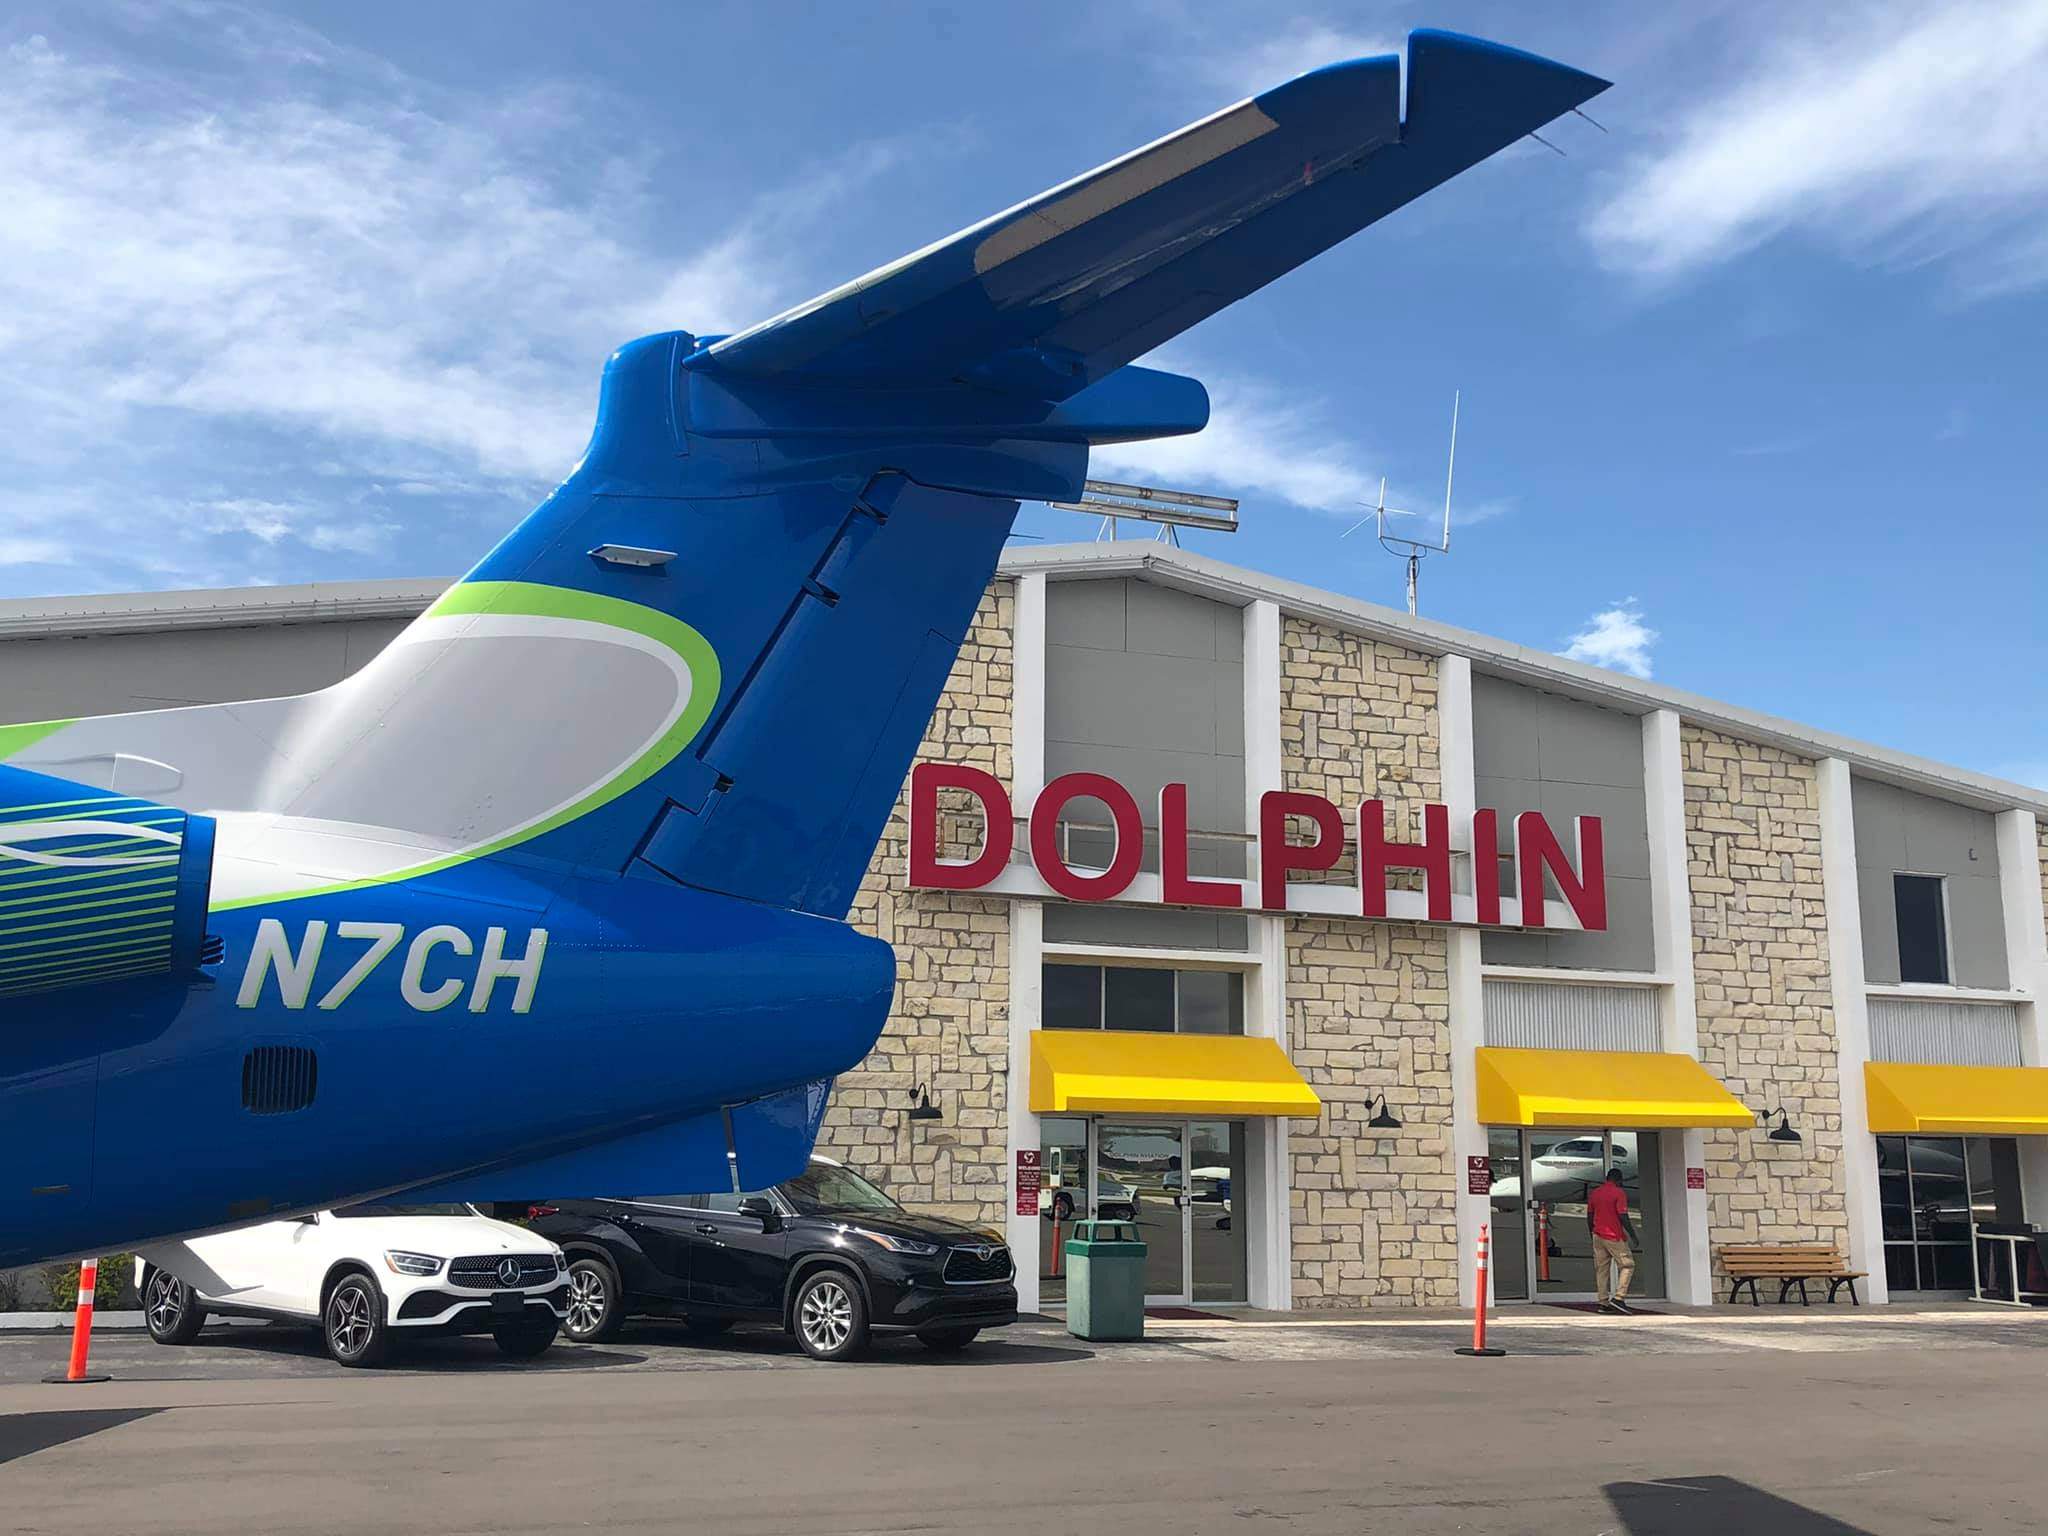 Hawthorne adds Dolphin Aviation to its Expanding Network